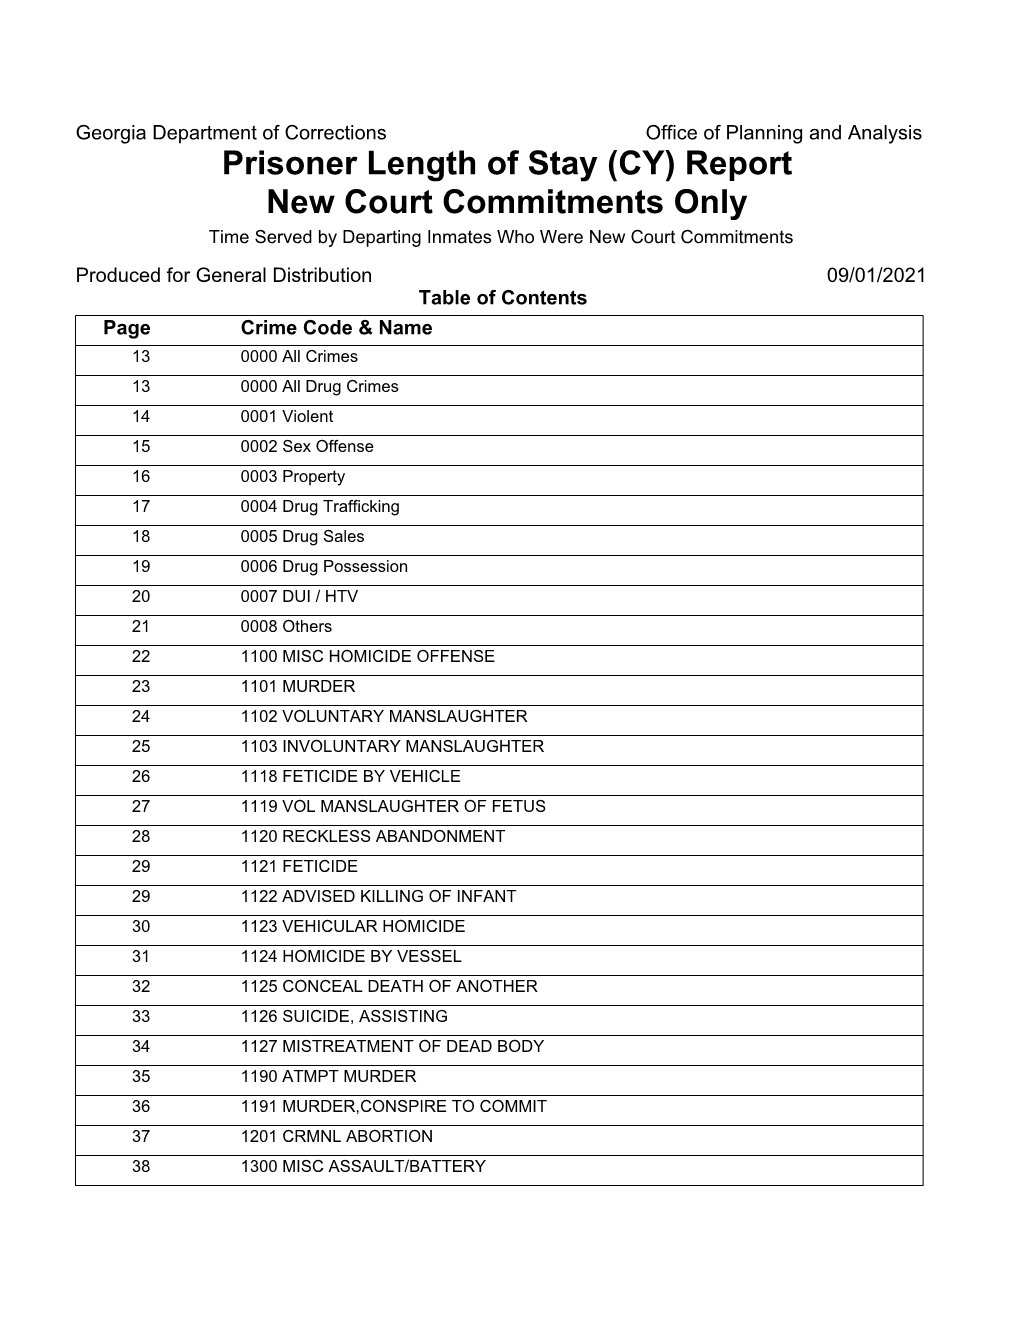 Prisoner Length of Stay (CY) Report New Court Commitments Only